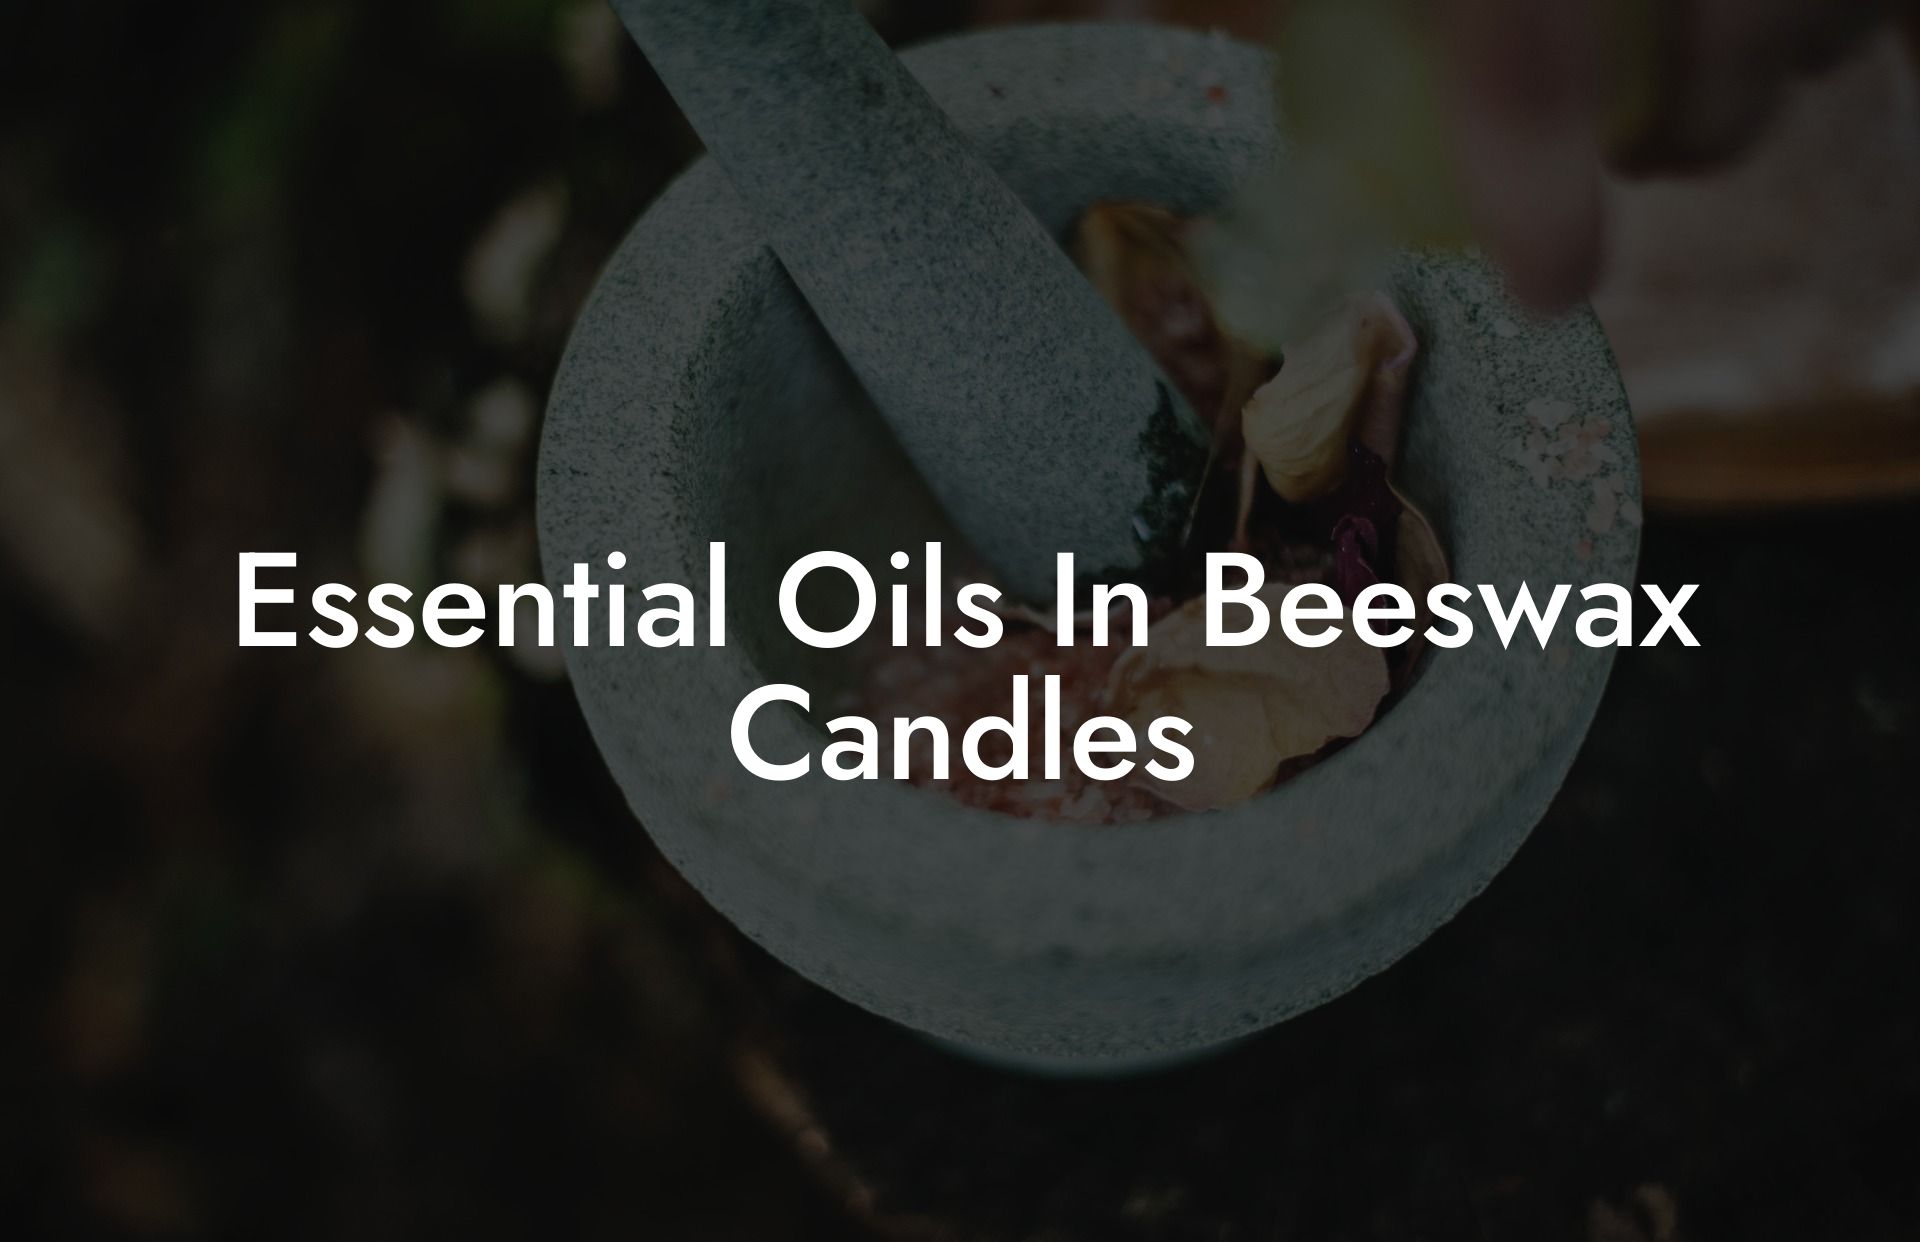 Essential Oils In Beeswax Candles